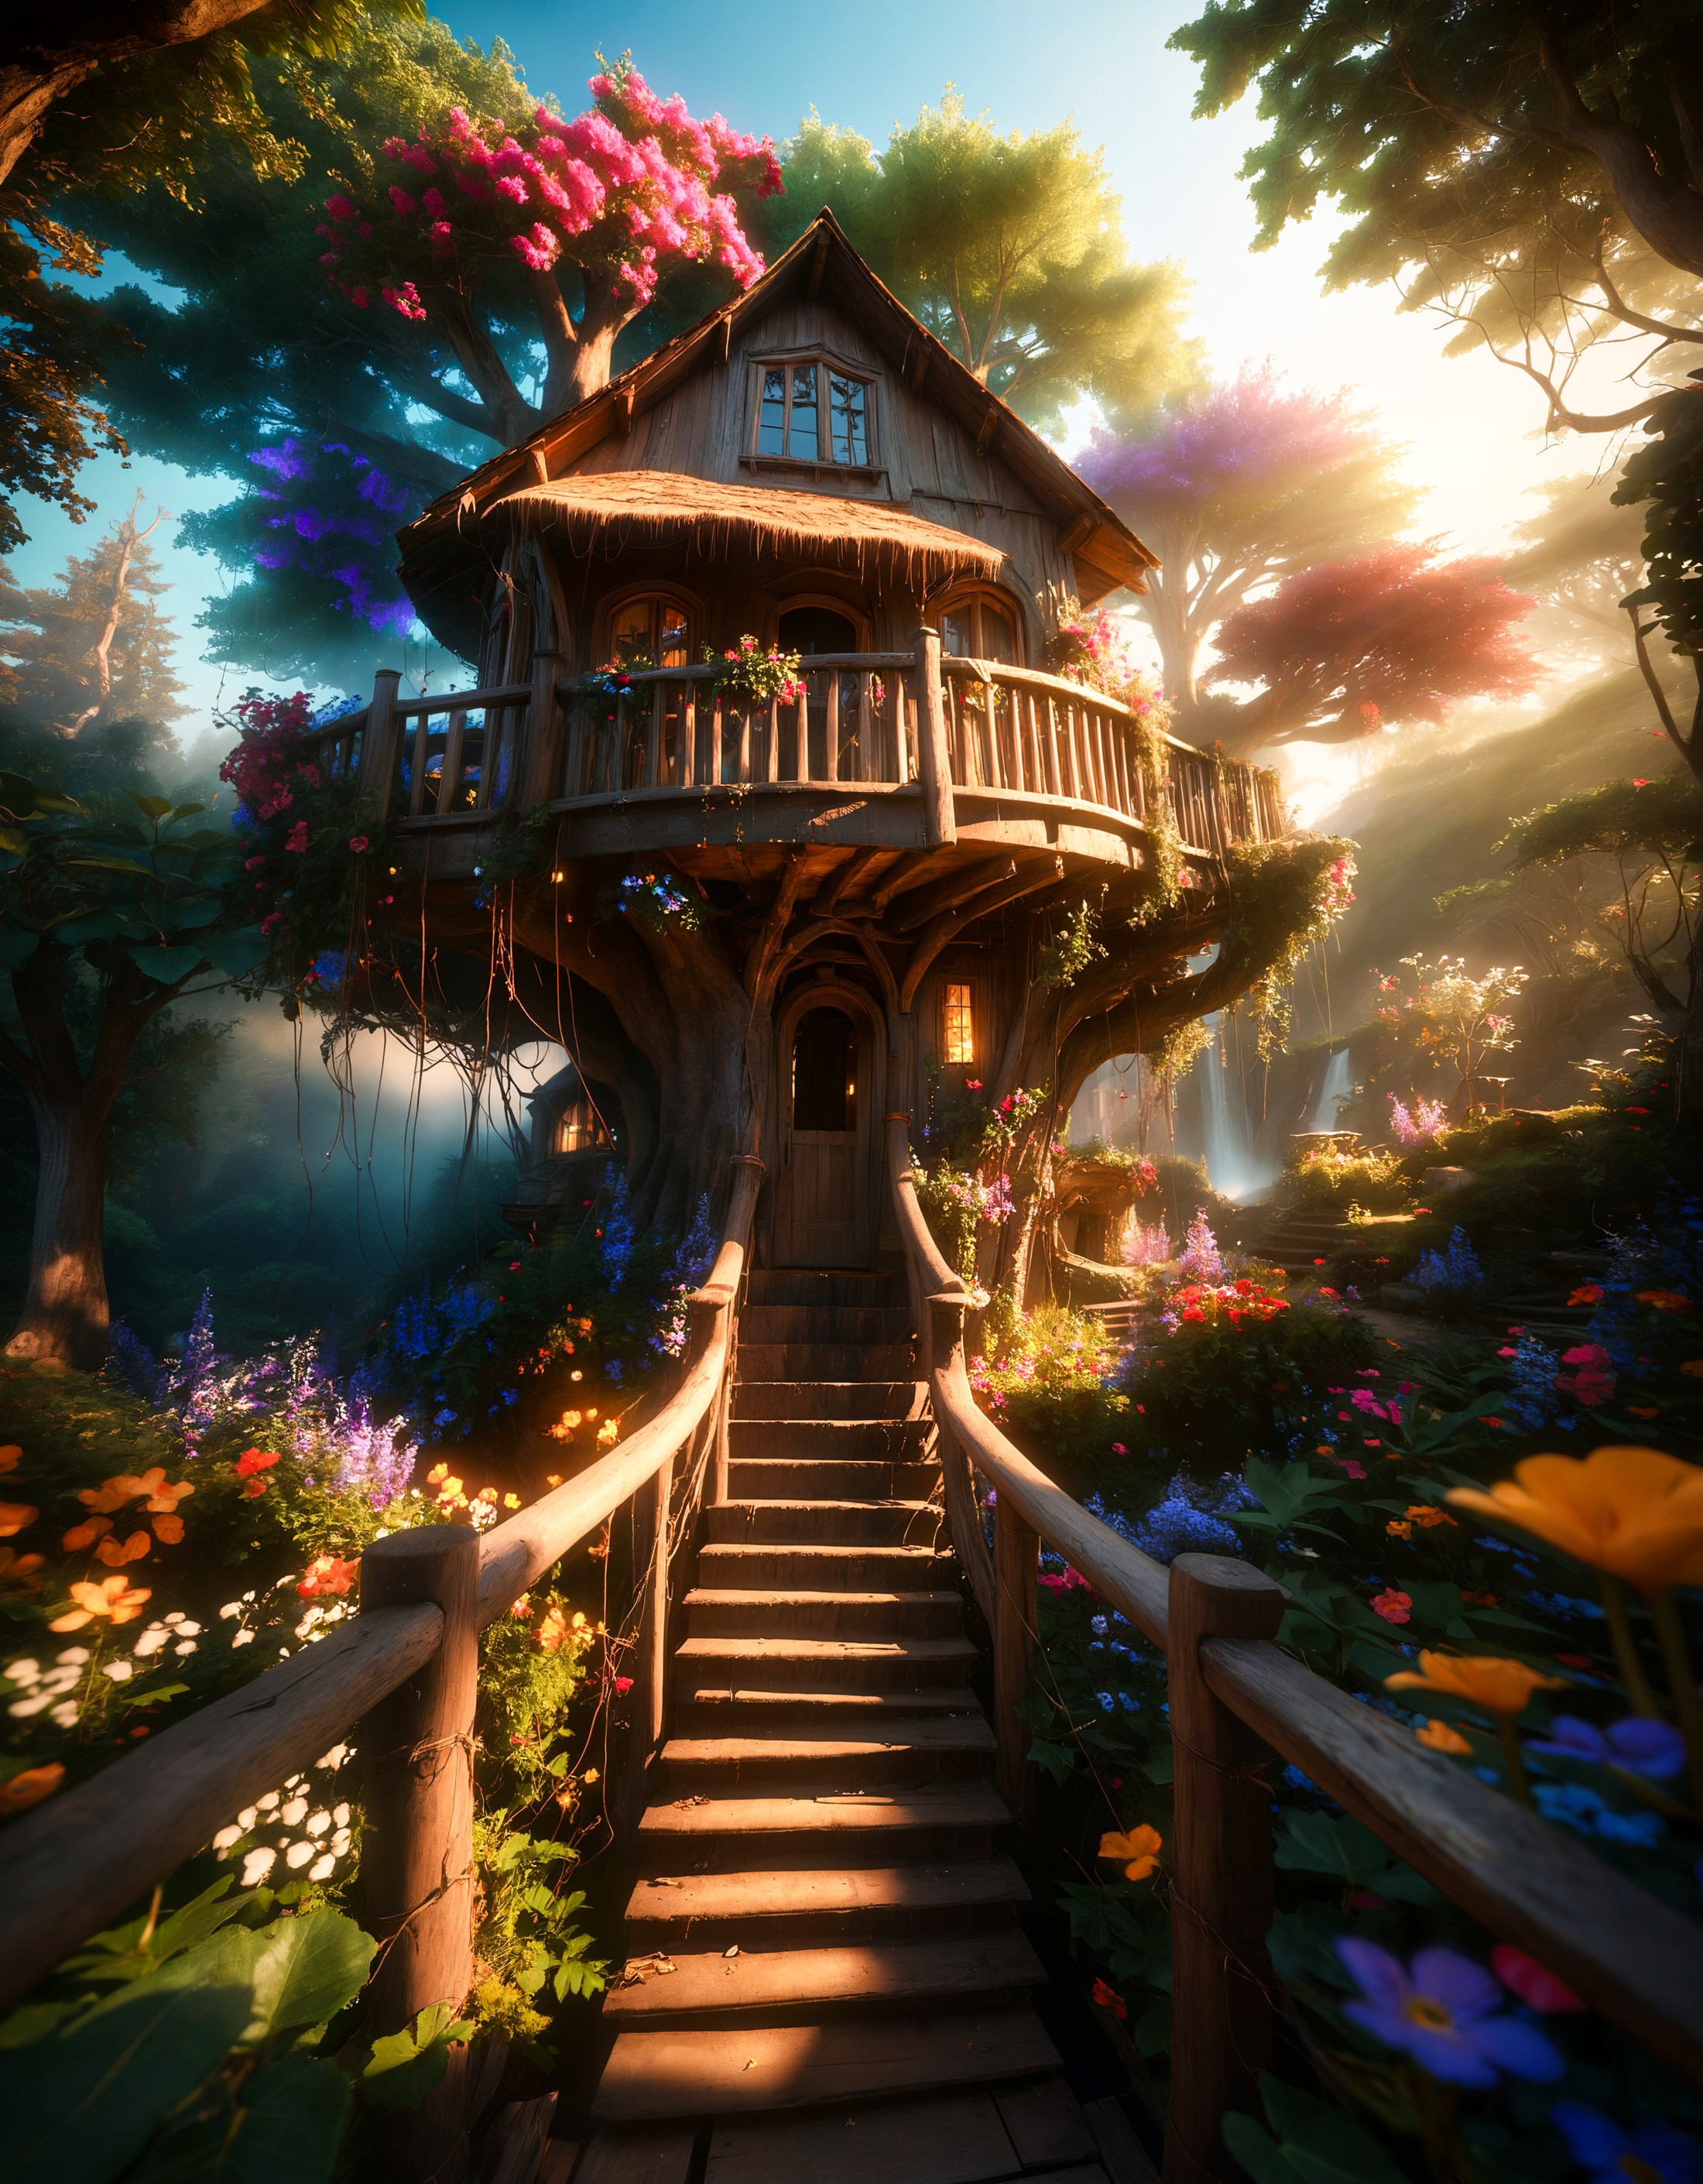 award winning photo of a tree house nestled in a dense forest, reminiscent of a magical fairyland. The tree house is built...